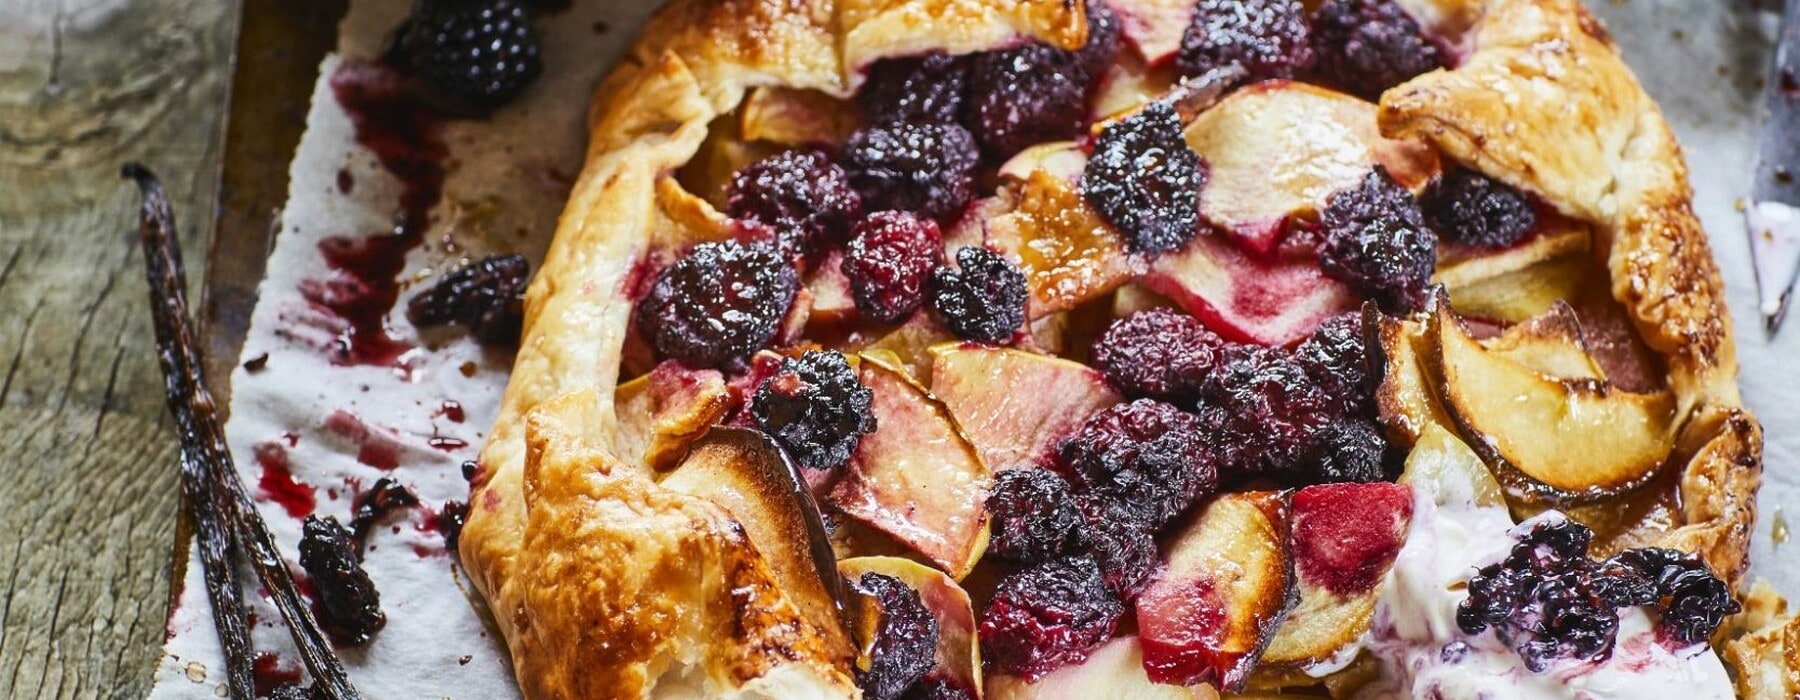 Apple, blackberry and vanilla galette on a silver baking tray next to a bowl of vanilla ice cream